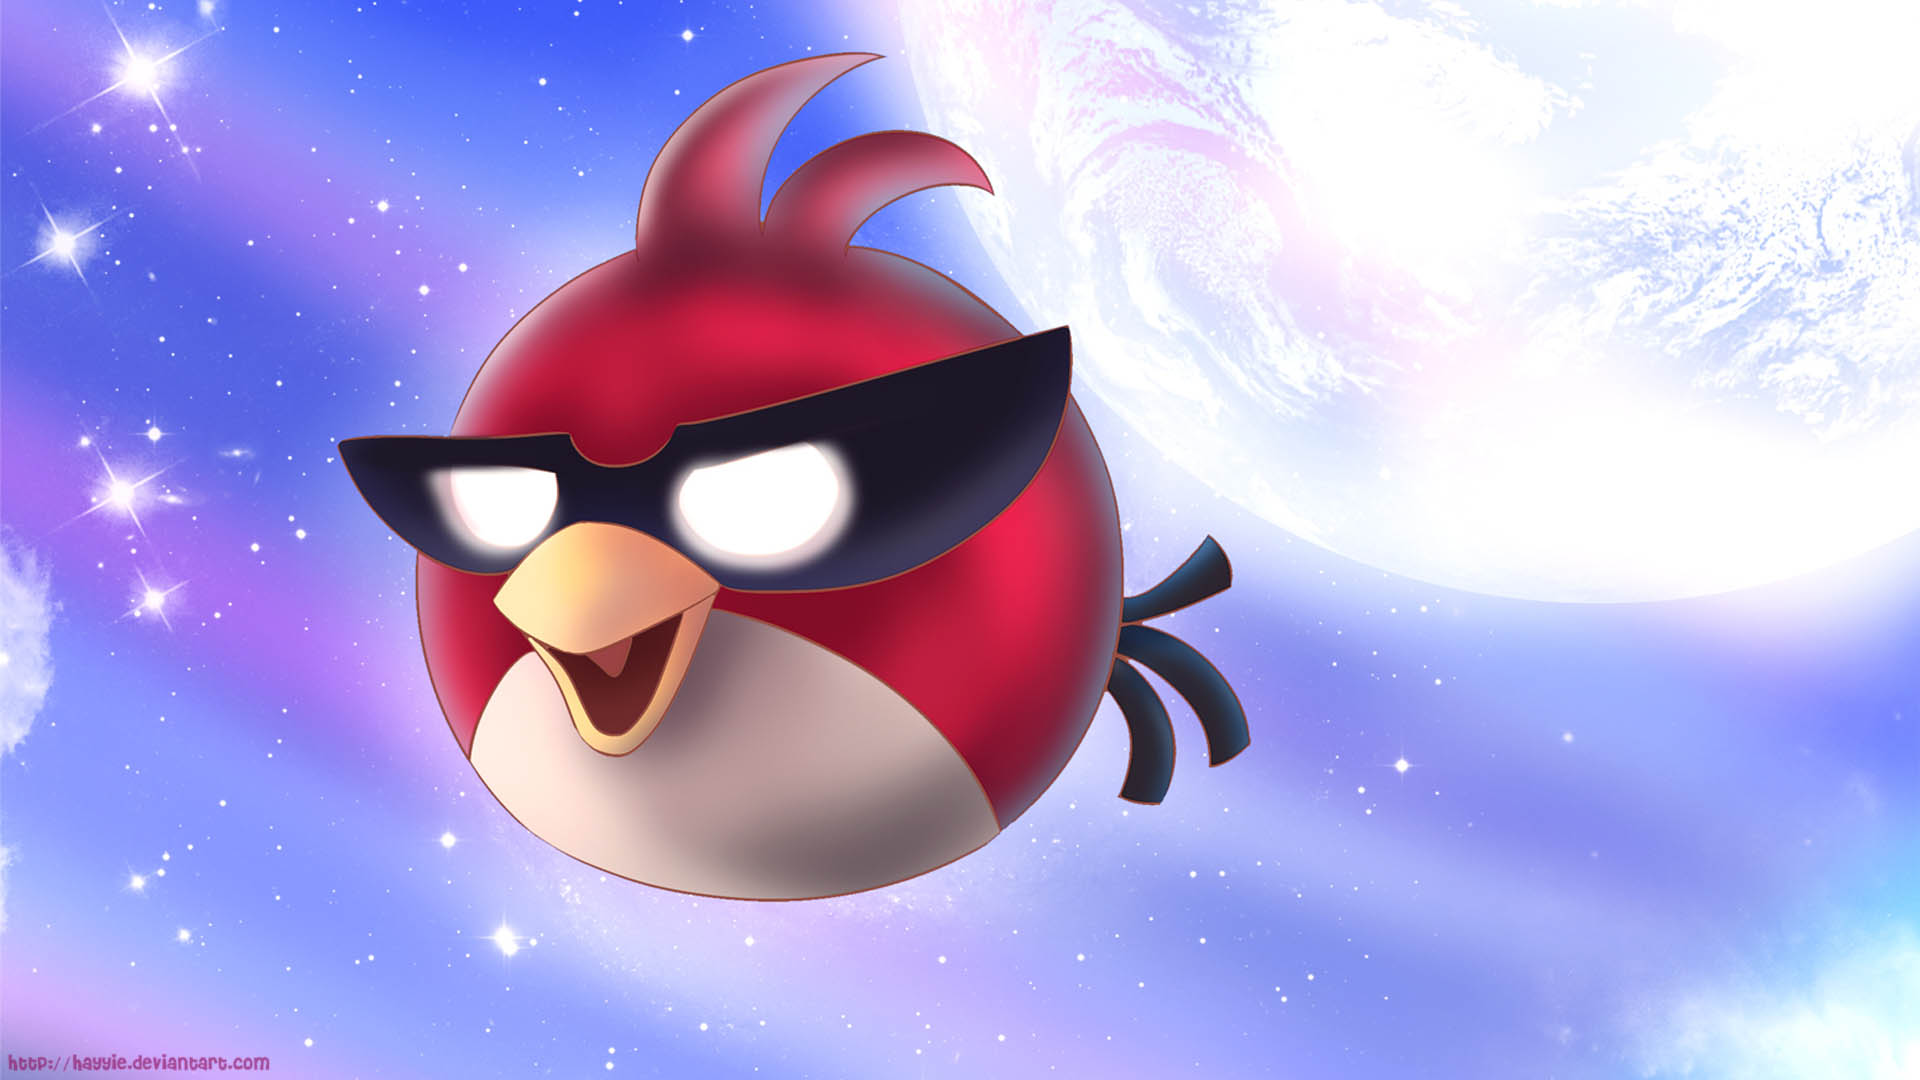 Angry Birds Wallpapers for Desktop 1920x1080